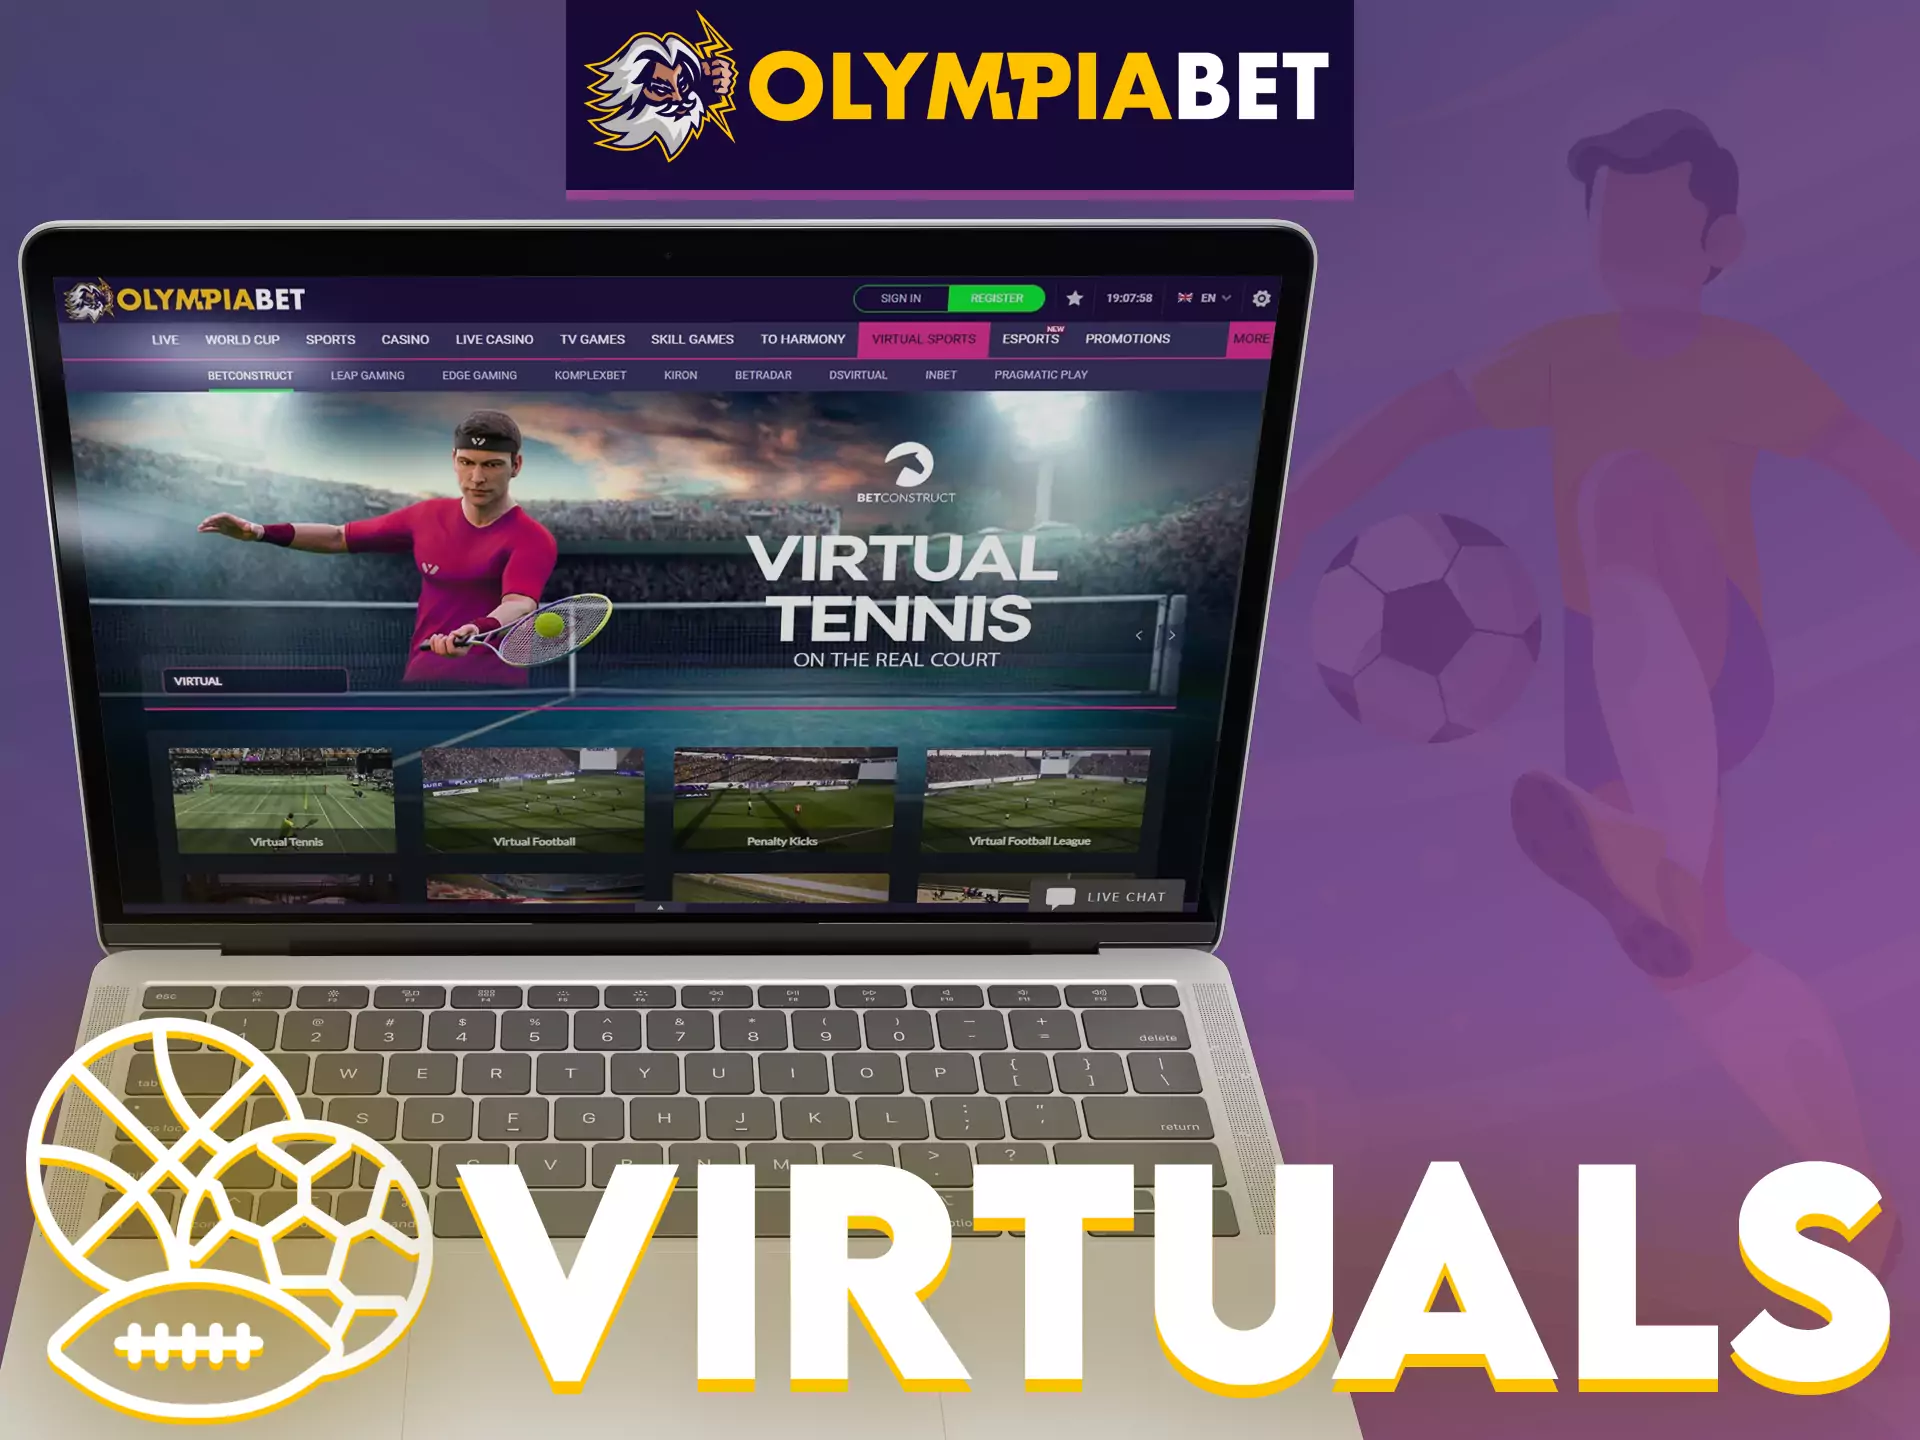 If you are a fan of sports, OlympiaBet gives you the opportunity to bet on various games.